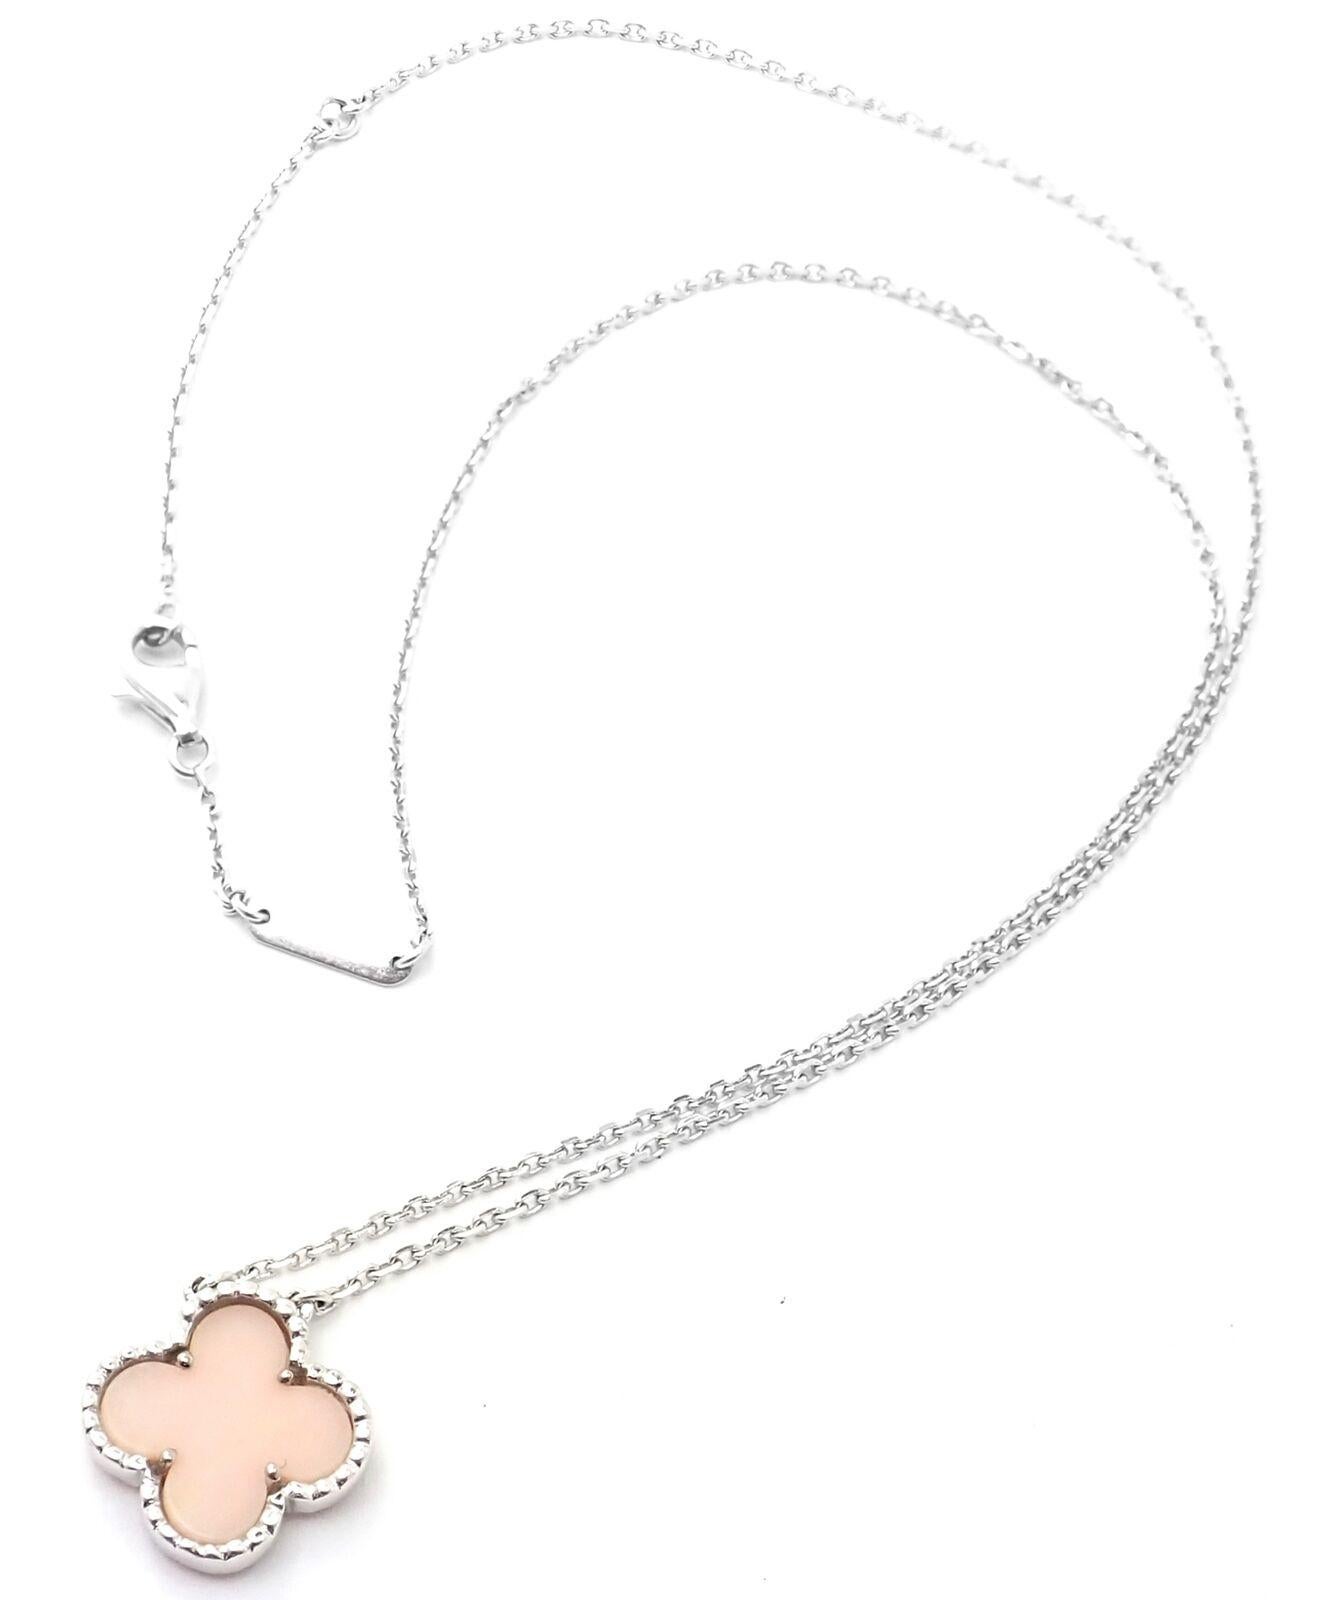 18k White Gold Vintage Alhambra Pink Opal Necklace By Van Cleef & Arpels.
With 1 alhambra shape pink opal stone: 15mm.
 Details:
 Length: 16.75